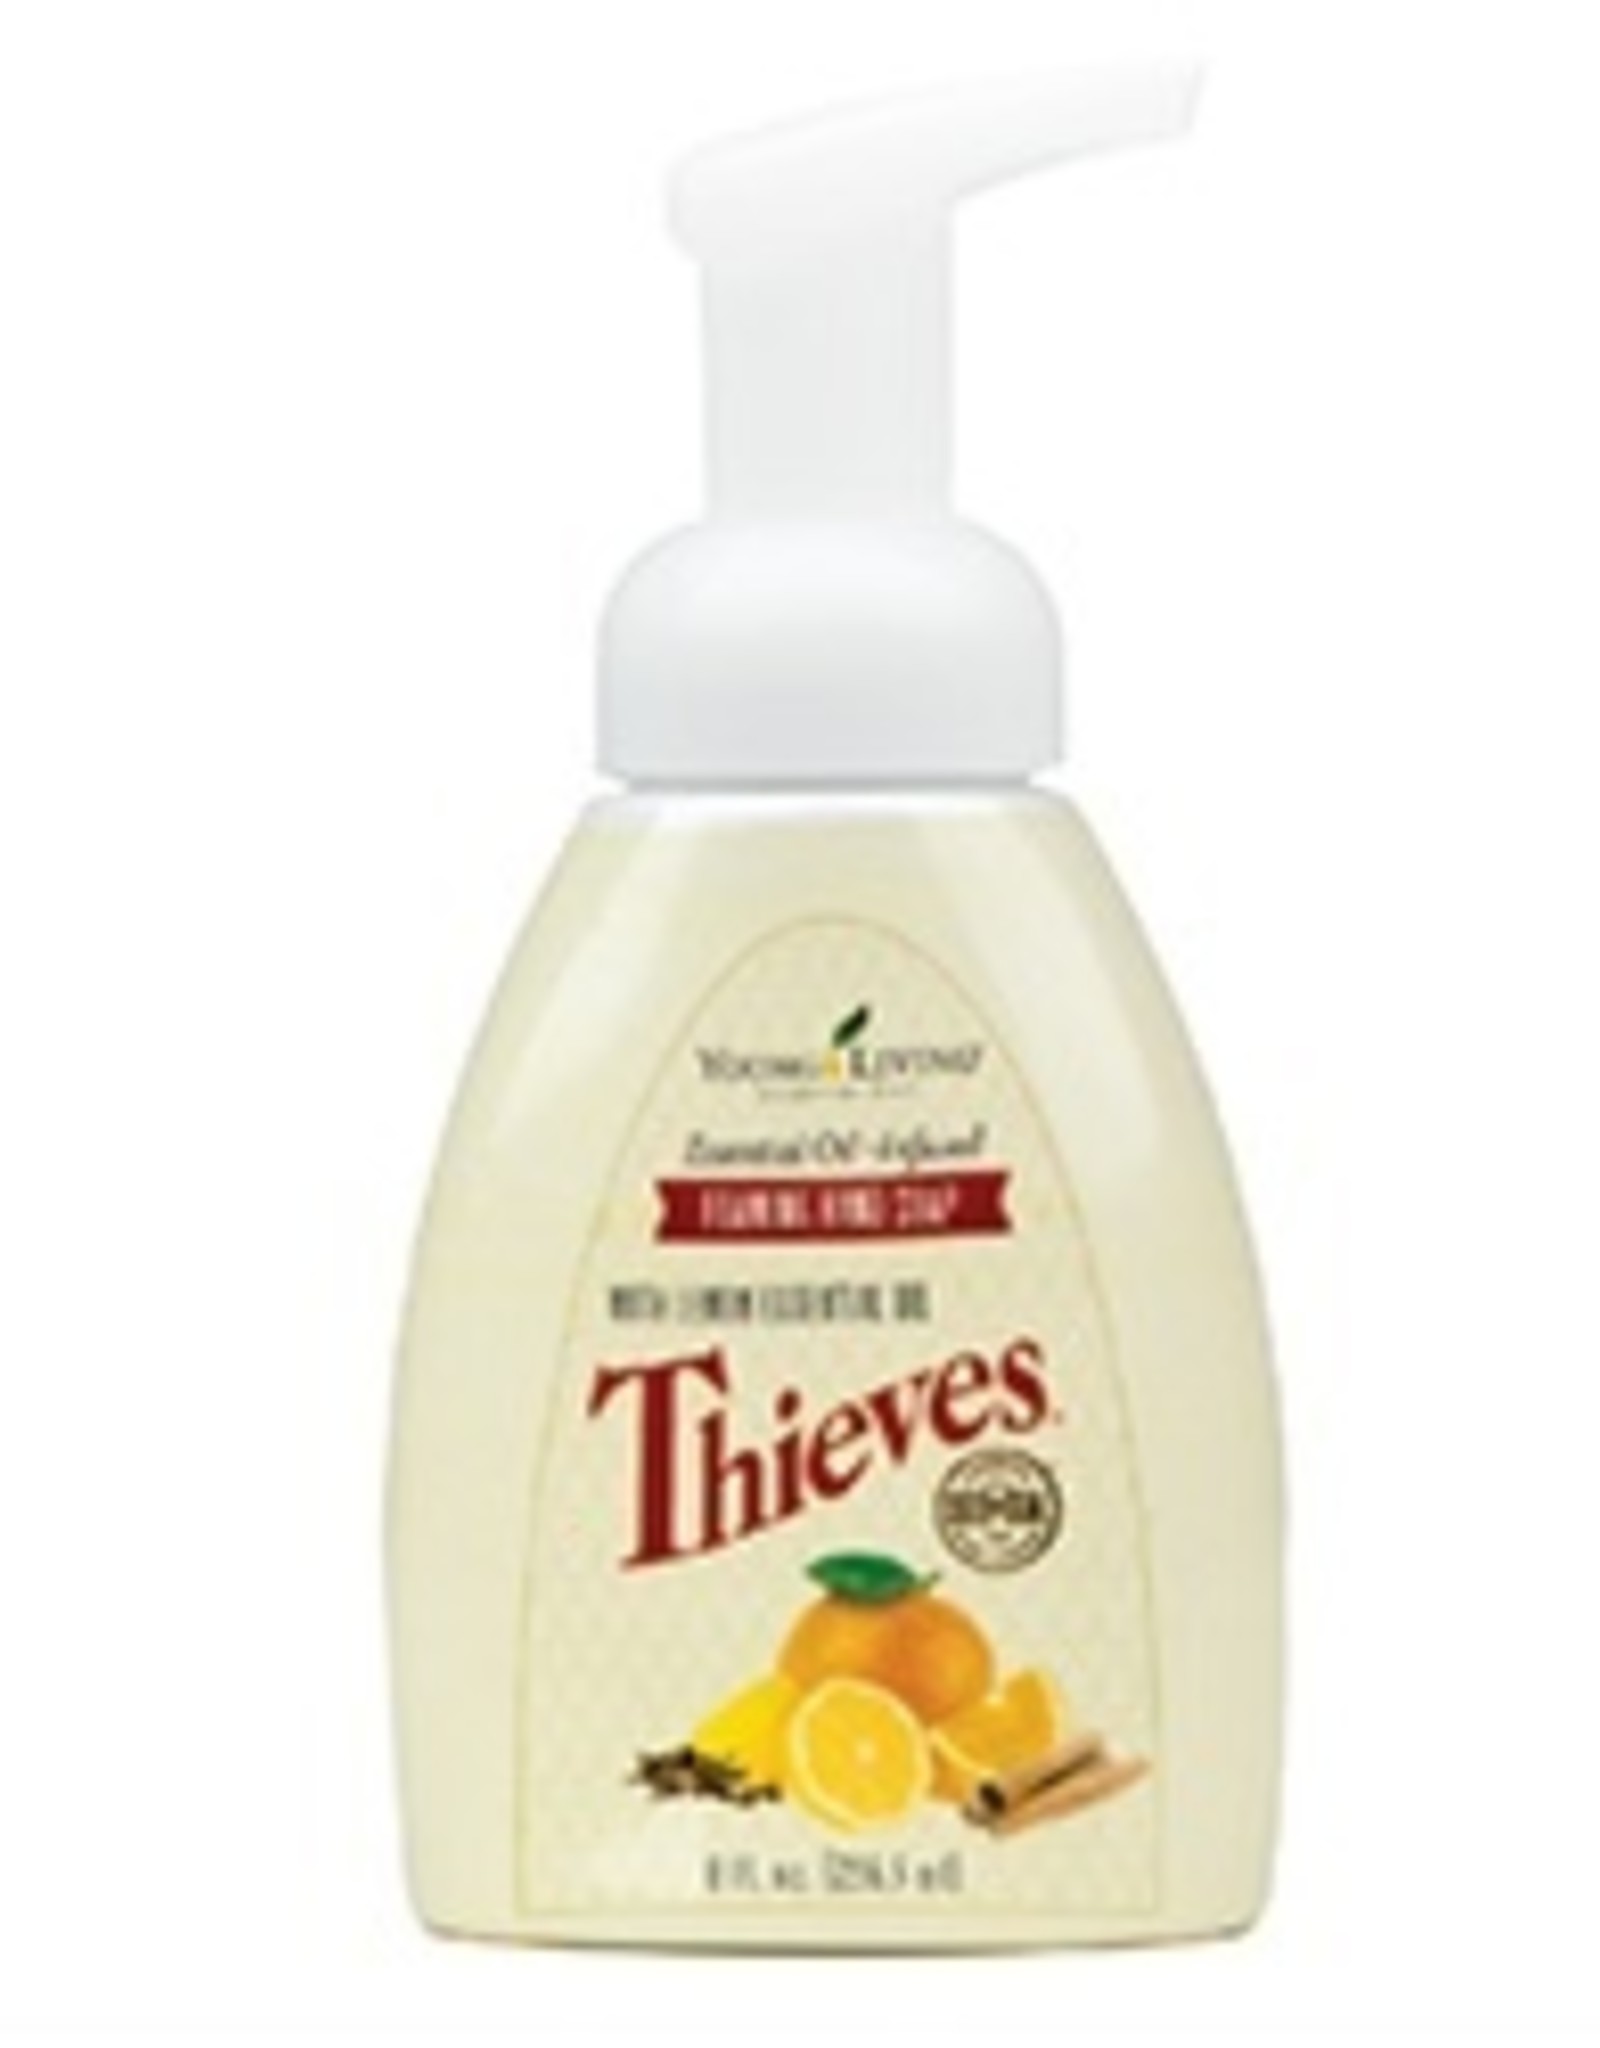 Young Living Thieves Foaming Hand Soap